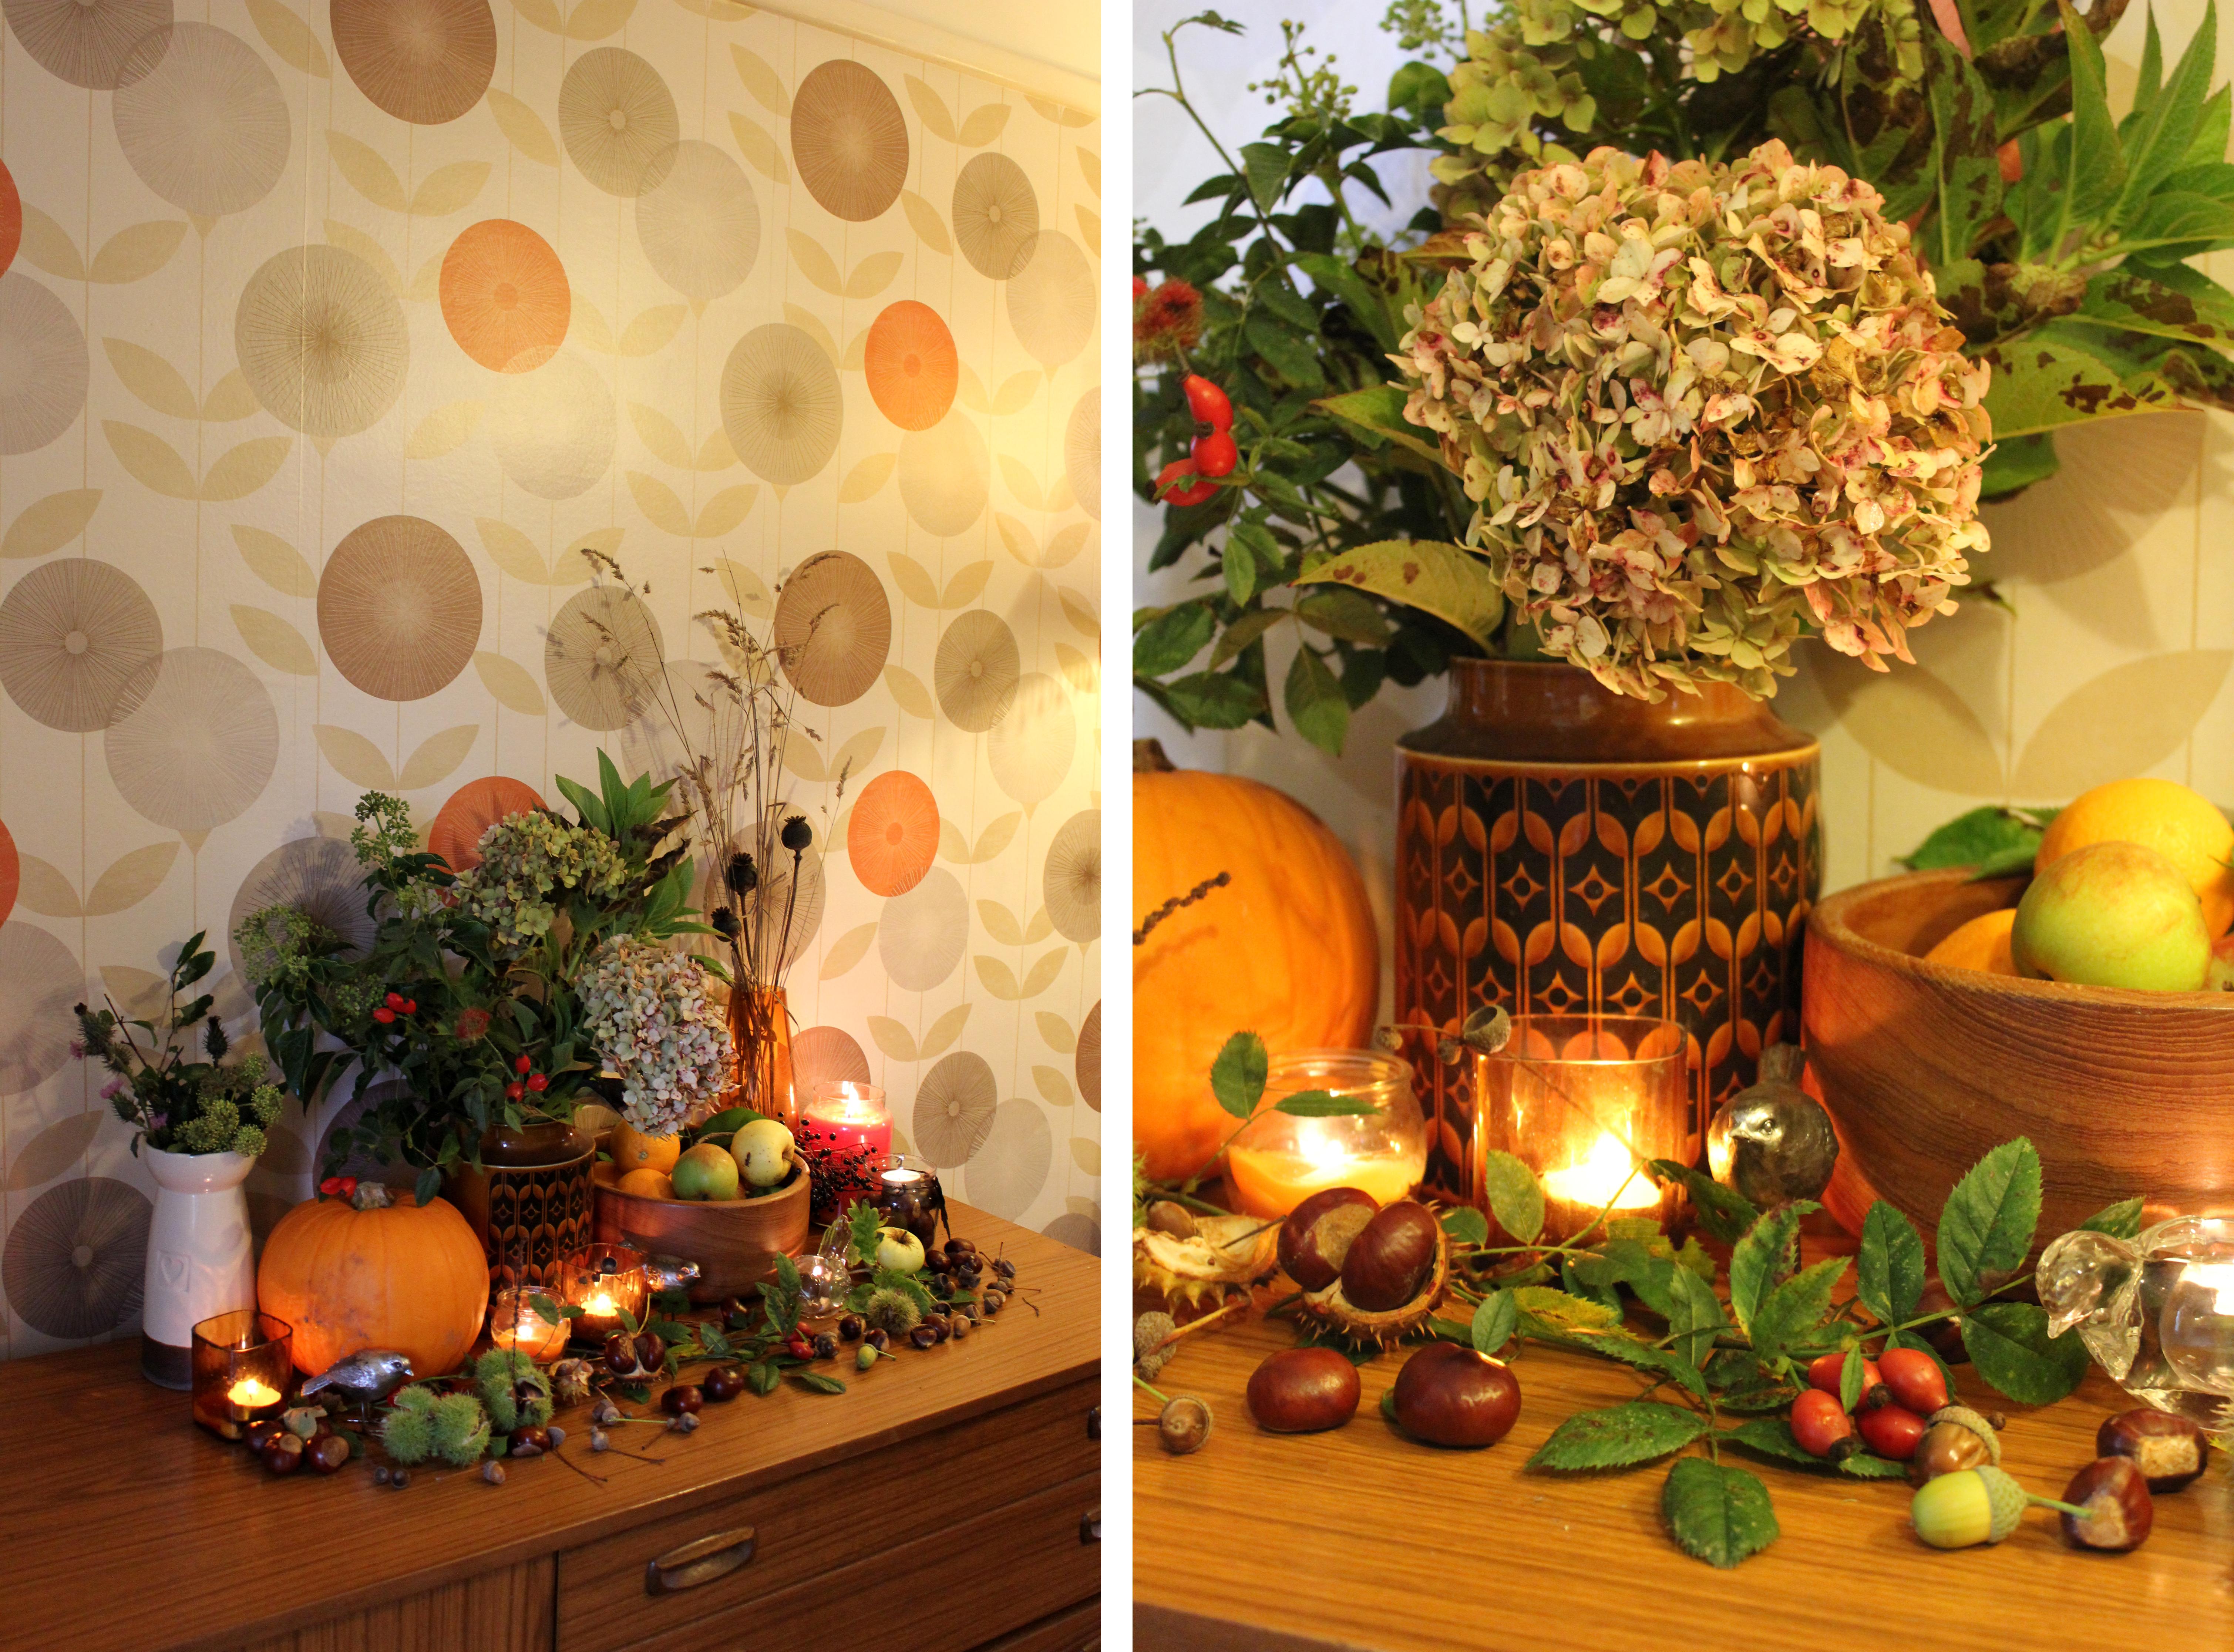 my retro living room harvest floral arrangment table display 2013